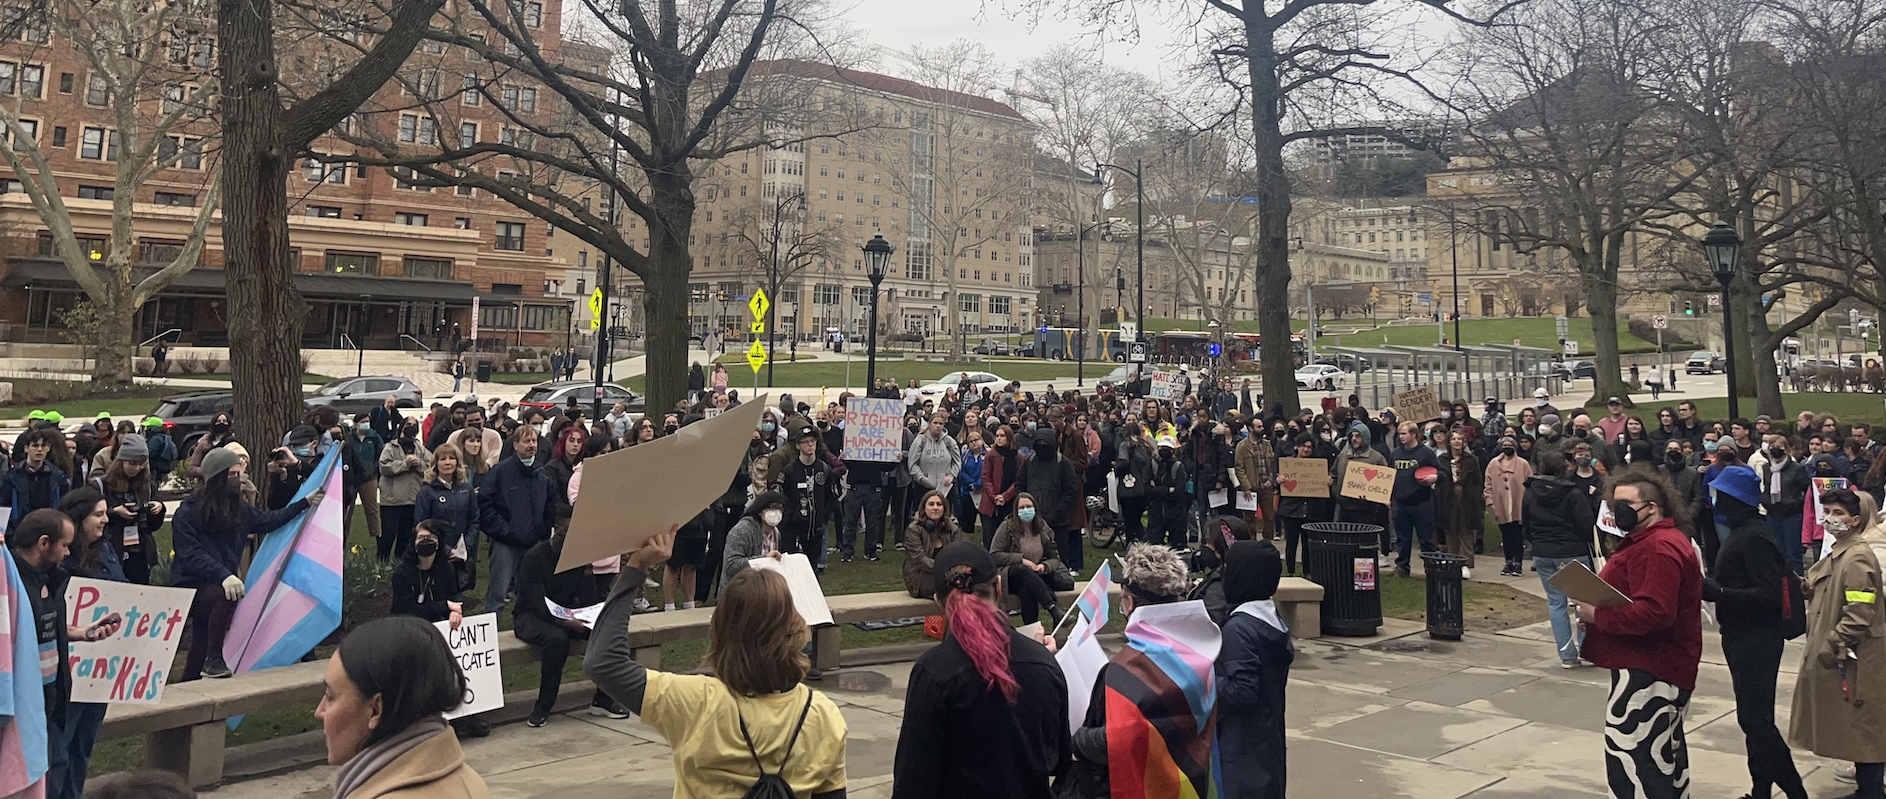 JURIST Special Coverage: University of Pittsburgh students protest anti-trans speakers